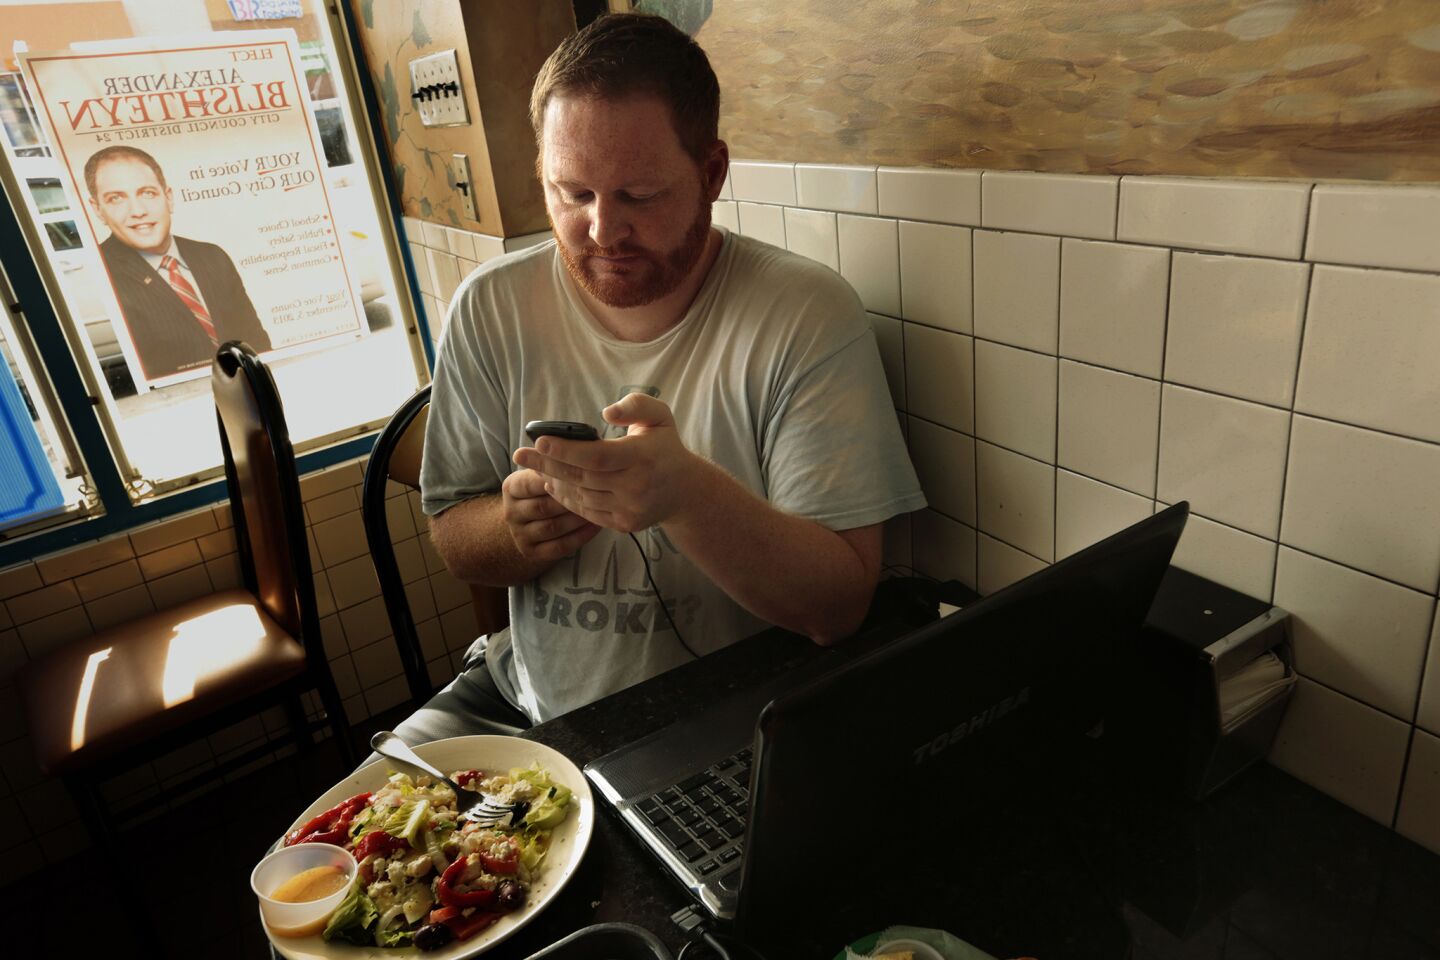 Without electricity in his RV, Hall charges his computer and cellphone at local restaurants.